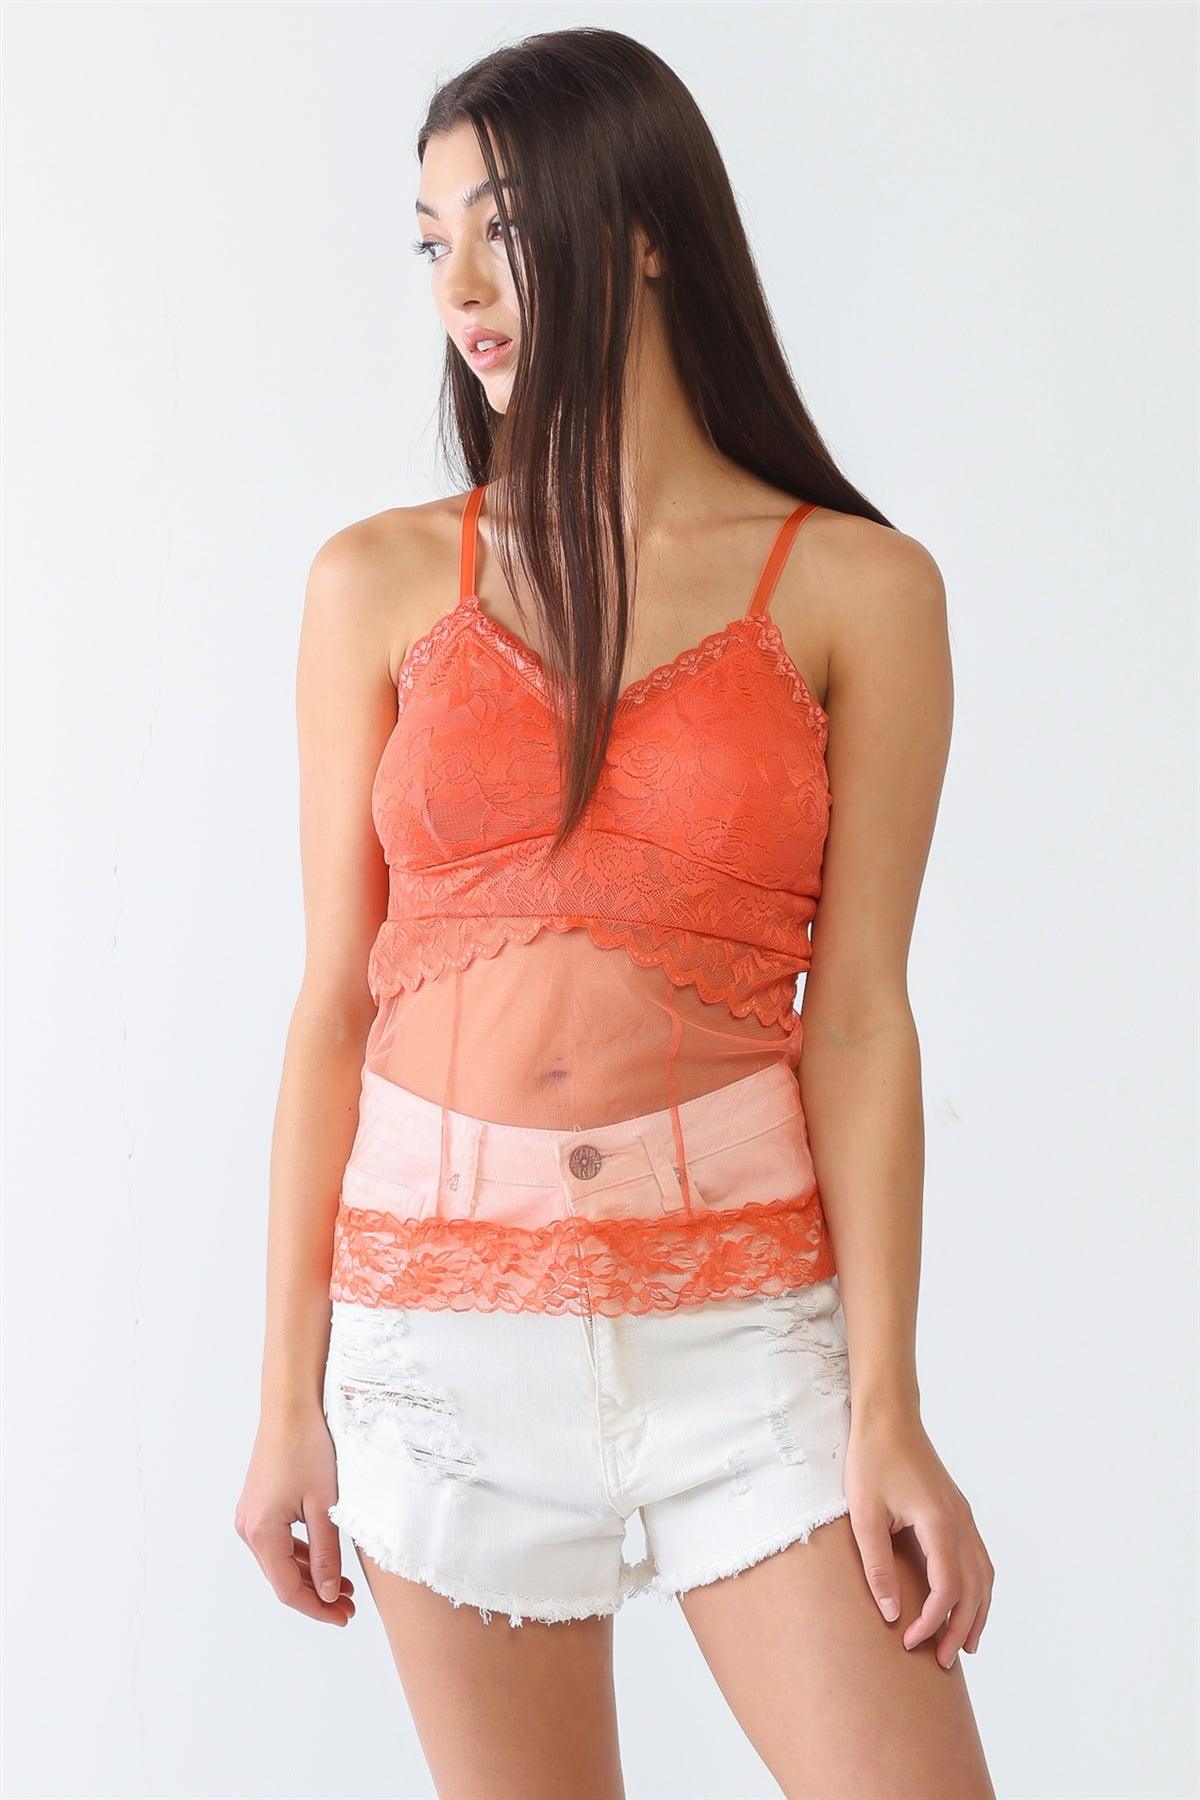 Coral Sheer Mesh Lace Sleeveless Push-Up Bustier Top